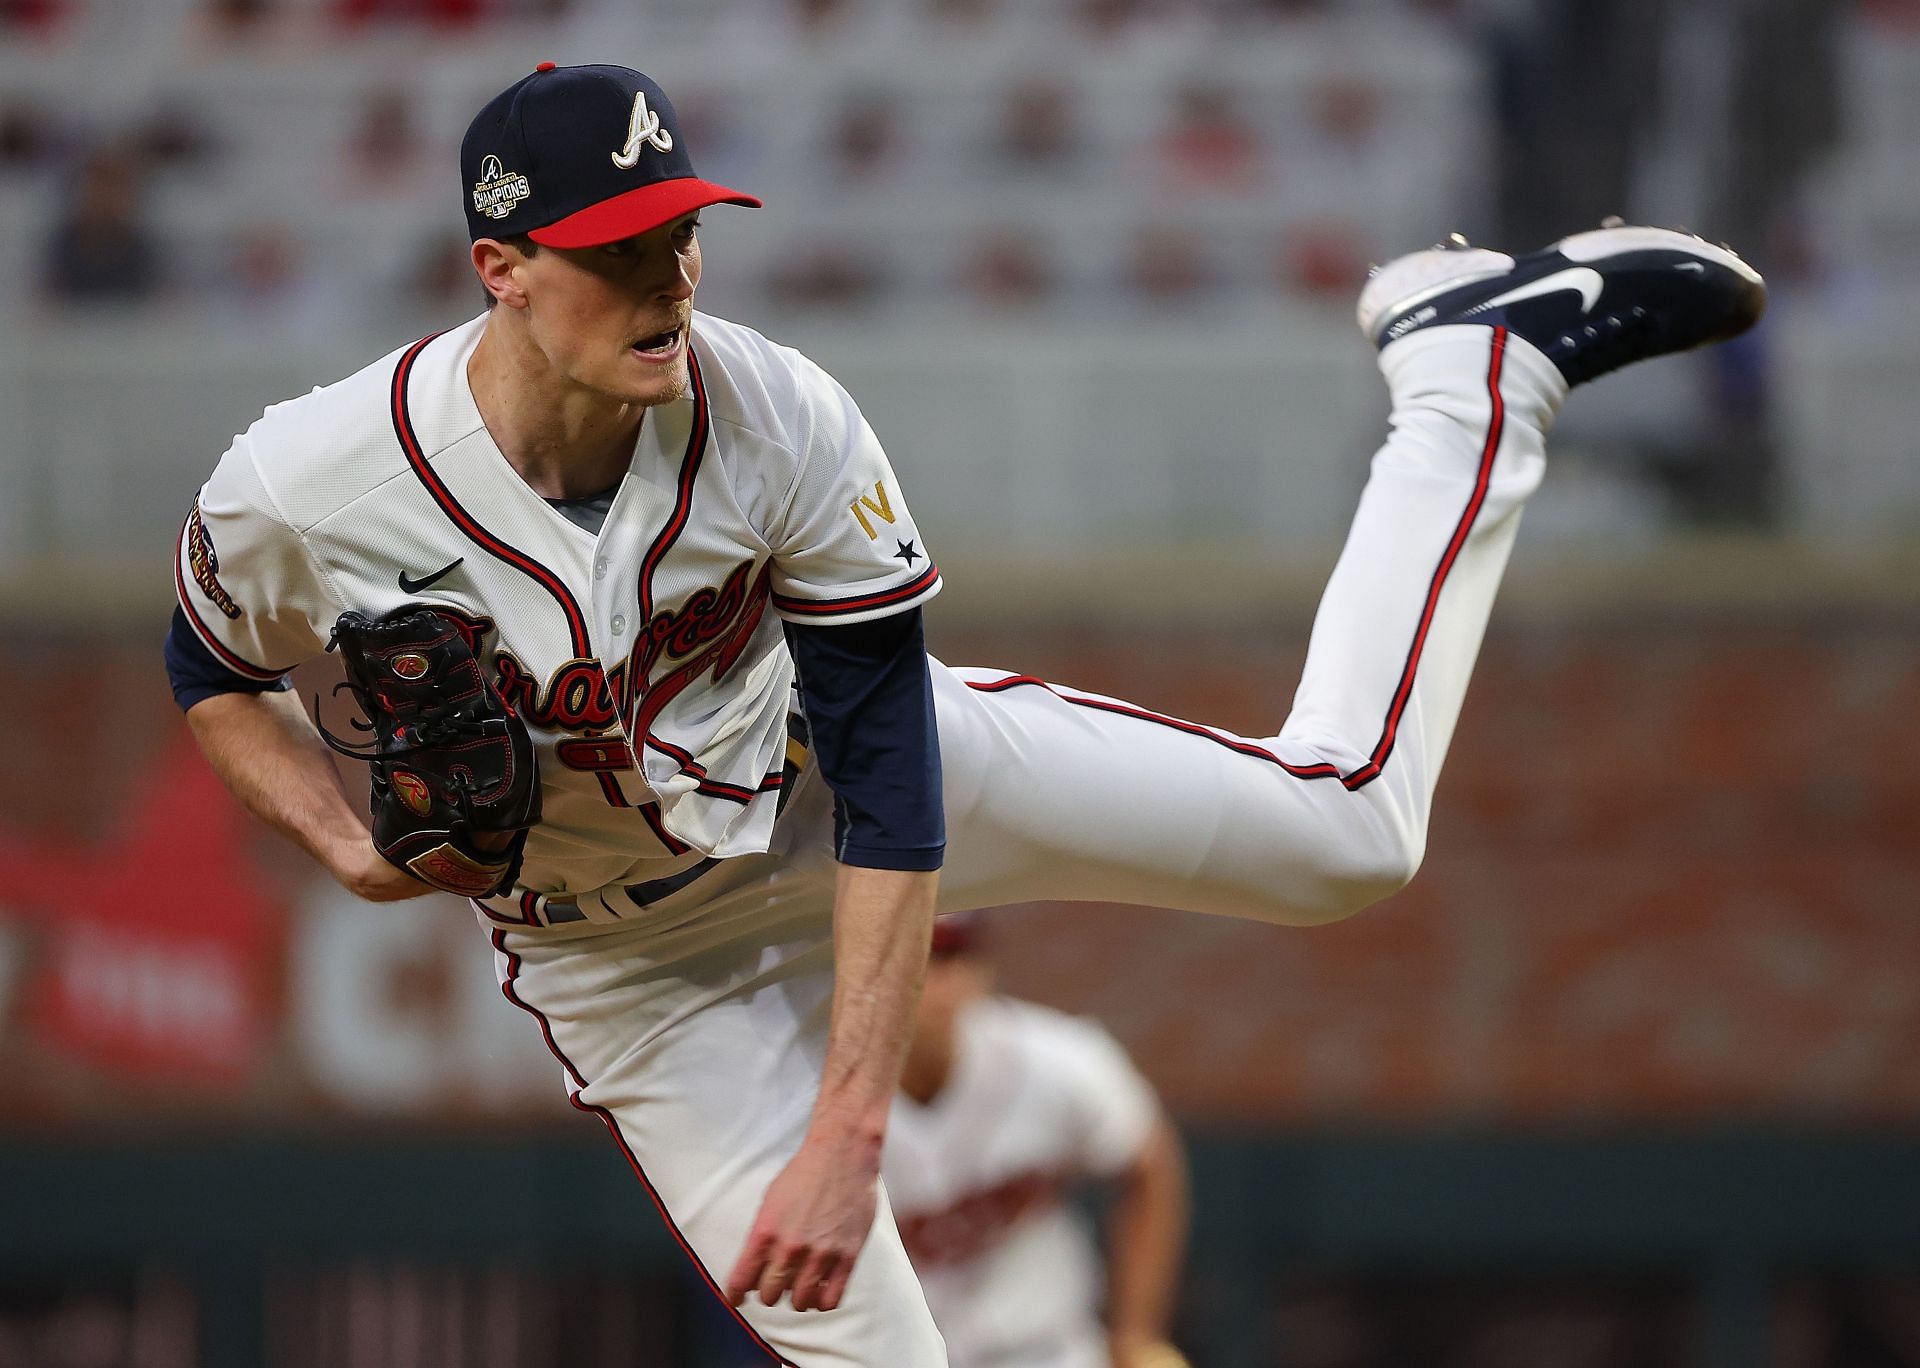 Fried, Braves go to salary arbitration for 2nd straight year